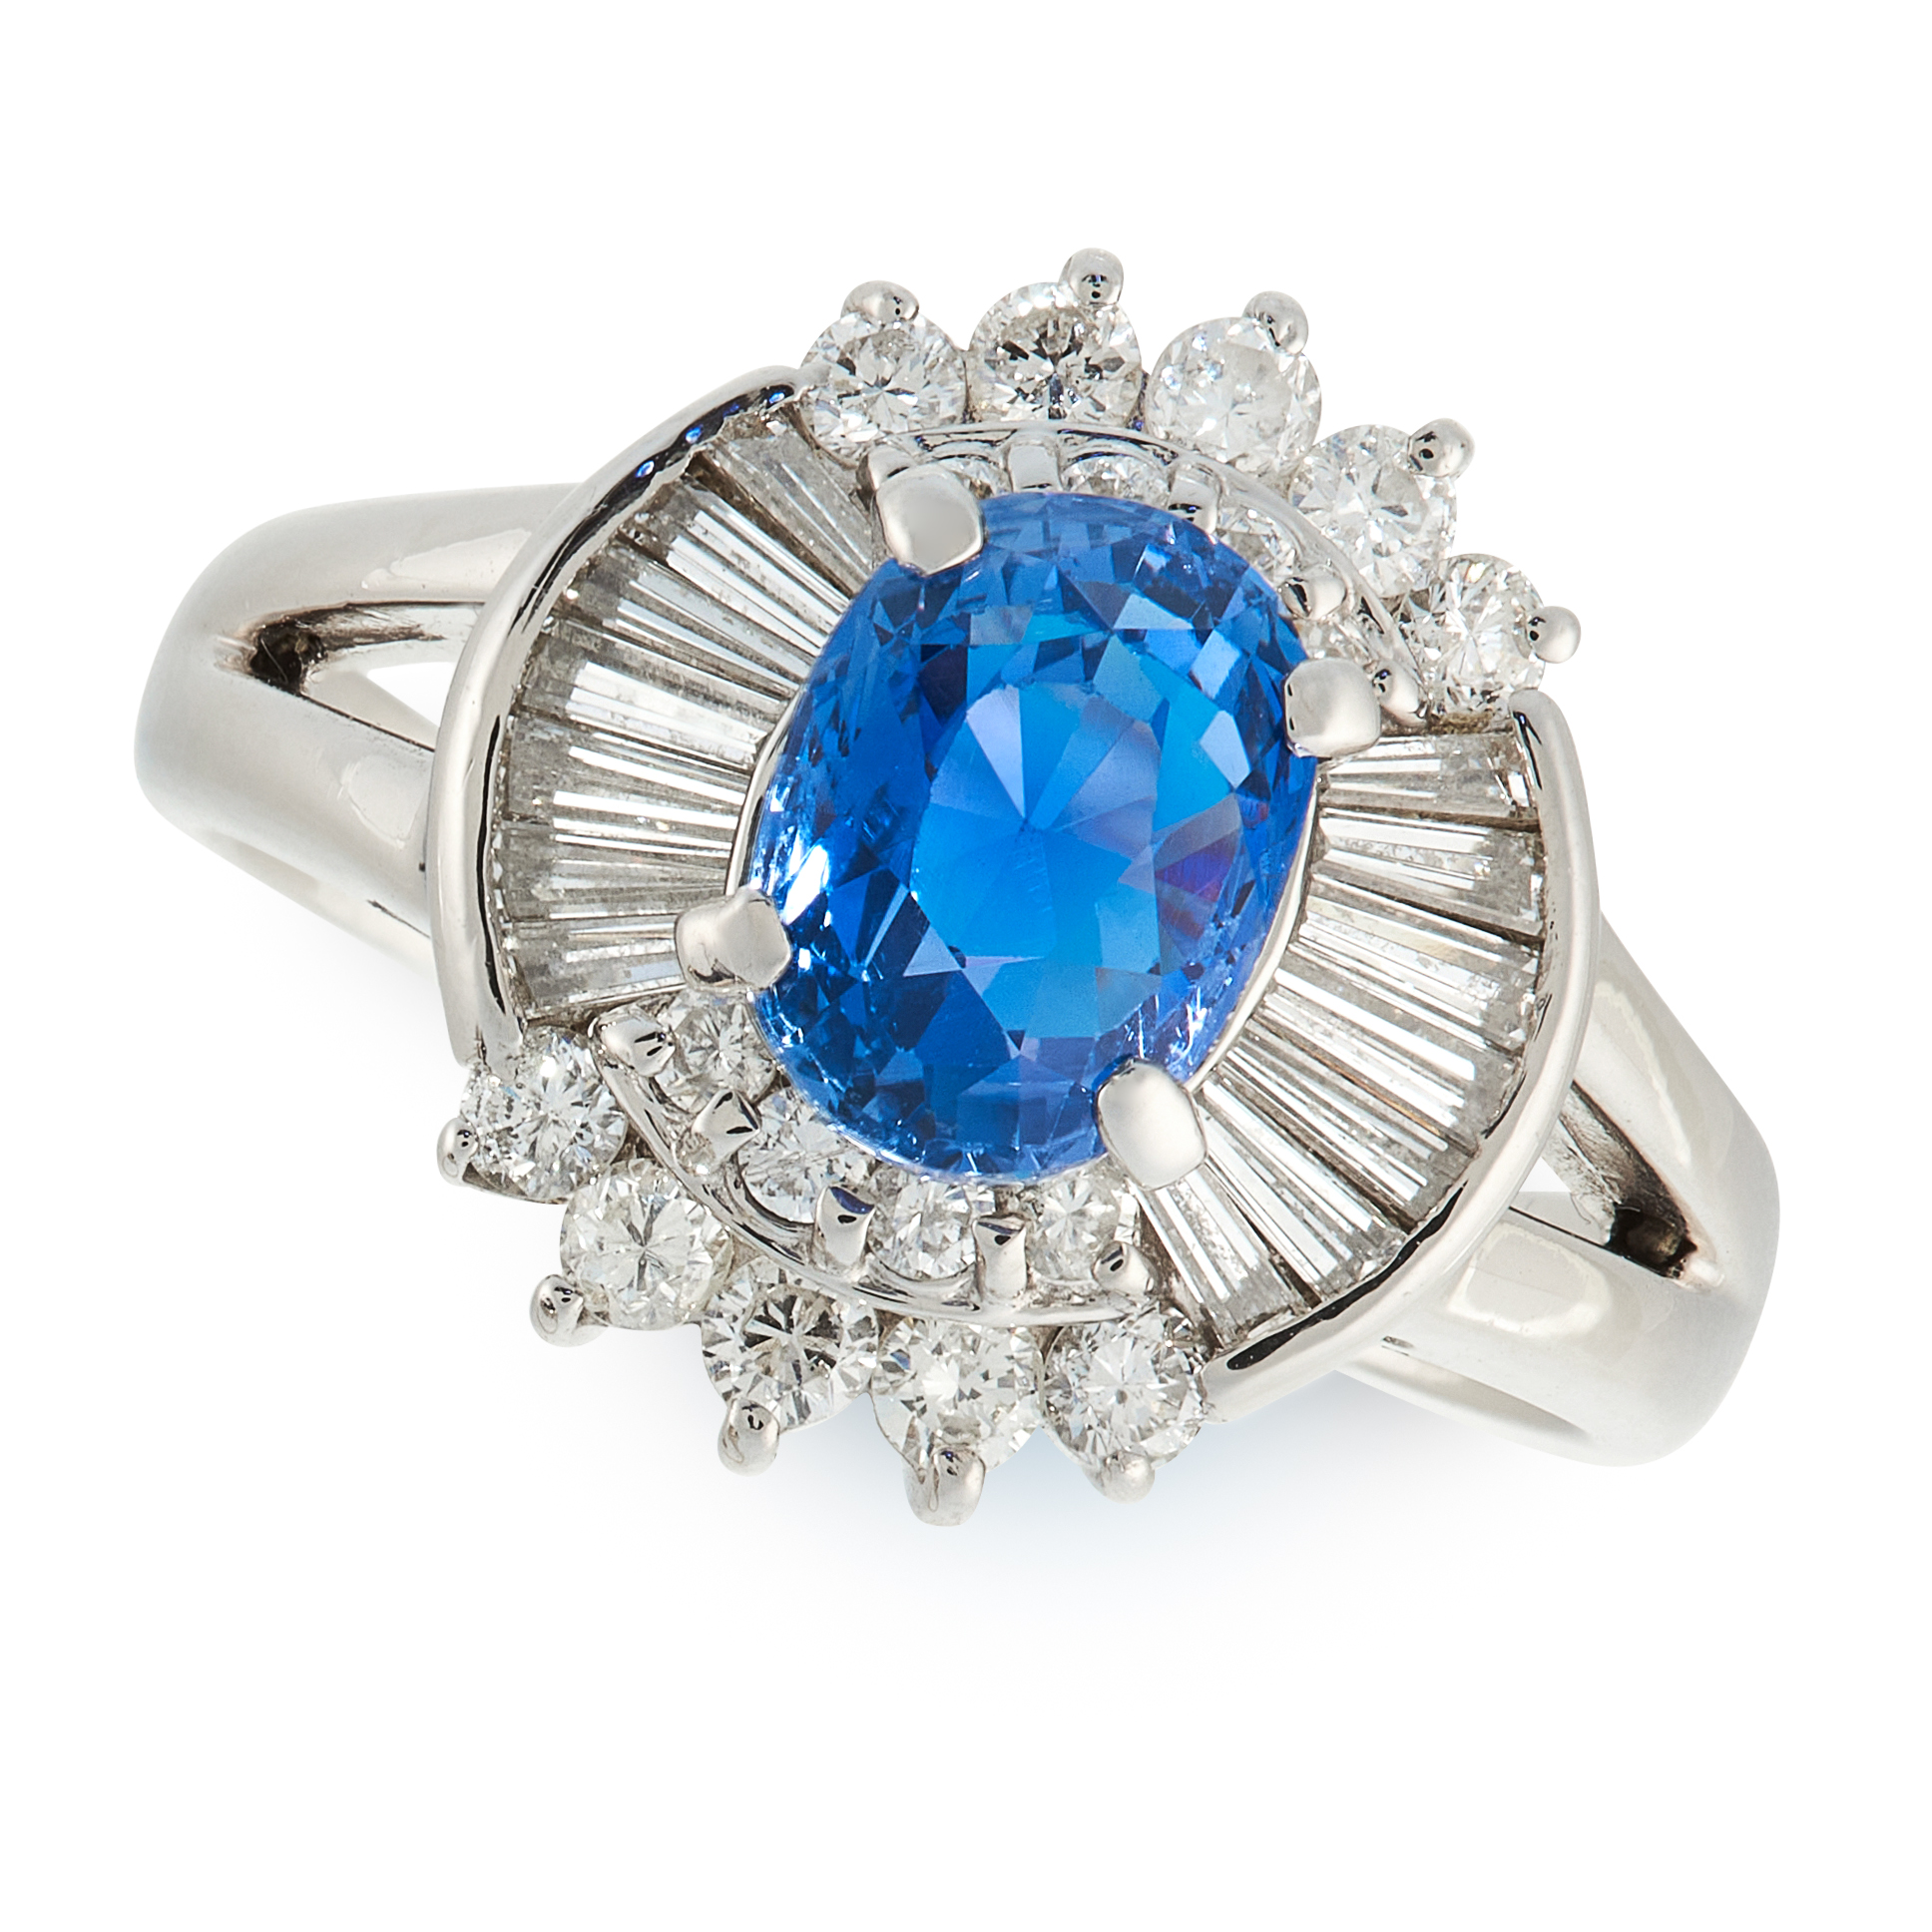 A SAPPHIRE AND DIAMOND CLUSTER RING in platinum, set with an oval cut sapphire of 1.93 carats in a